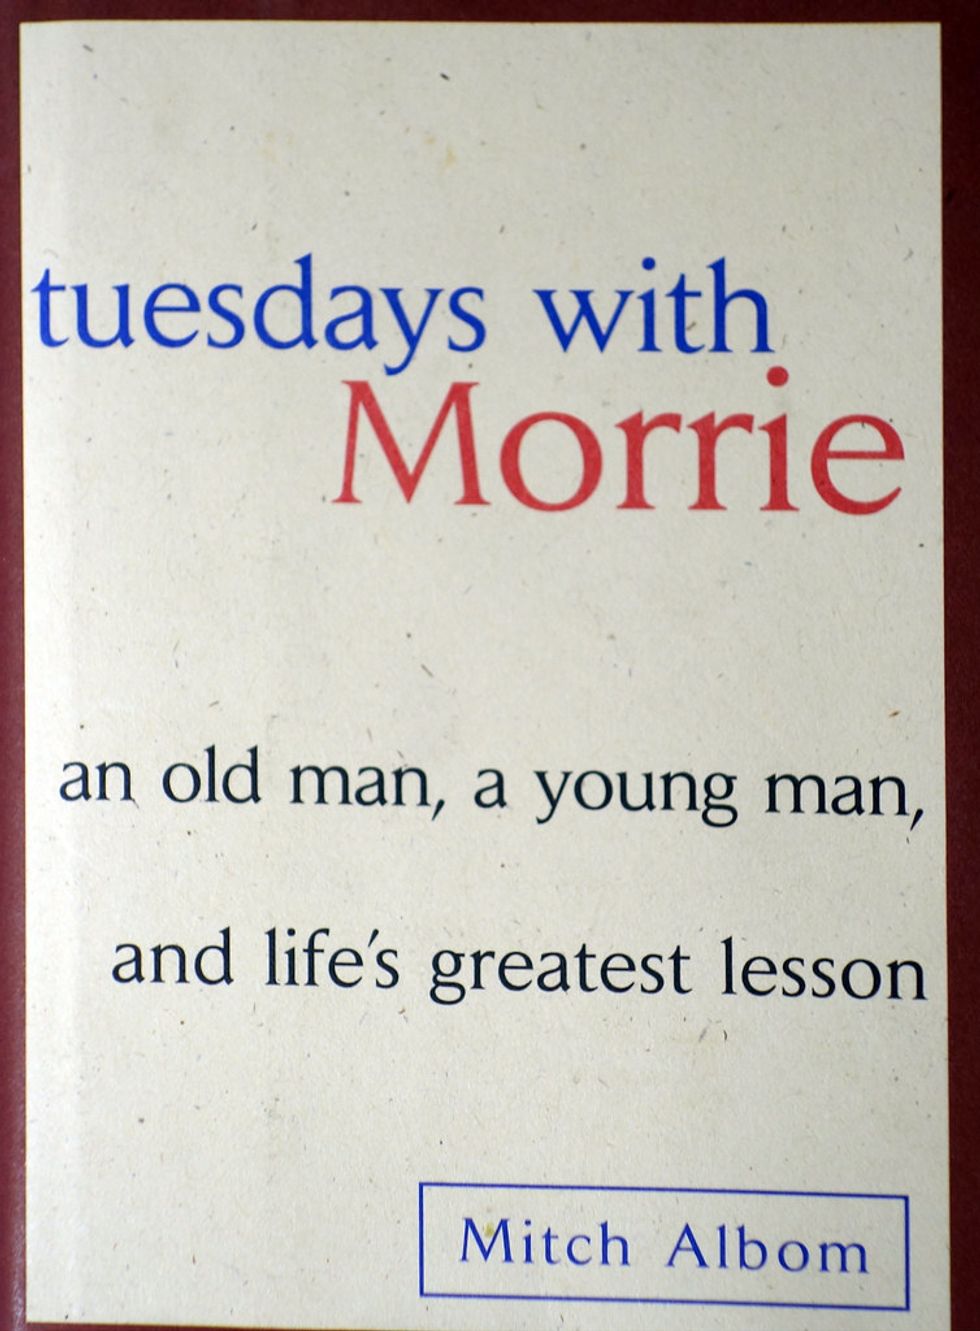 27 Of The Most Essential And Life Changing Quotes from "Tuesdays With Morrie"